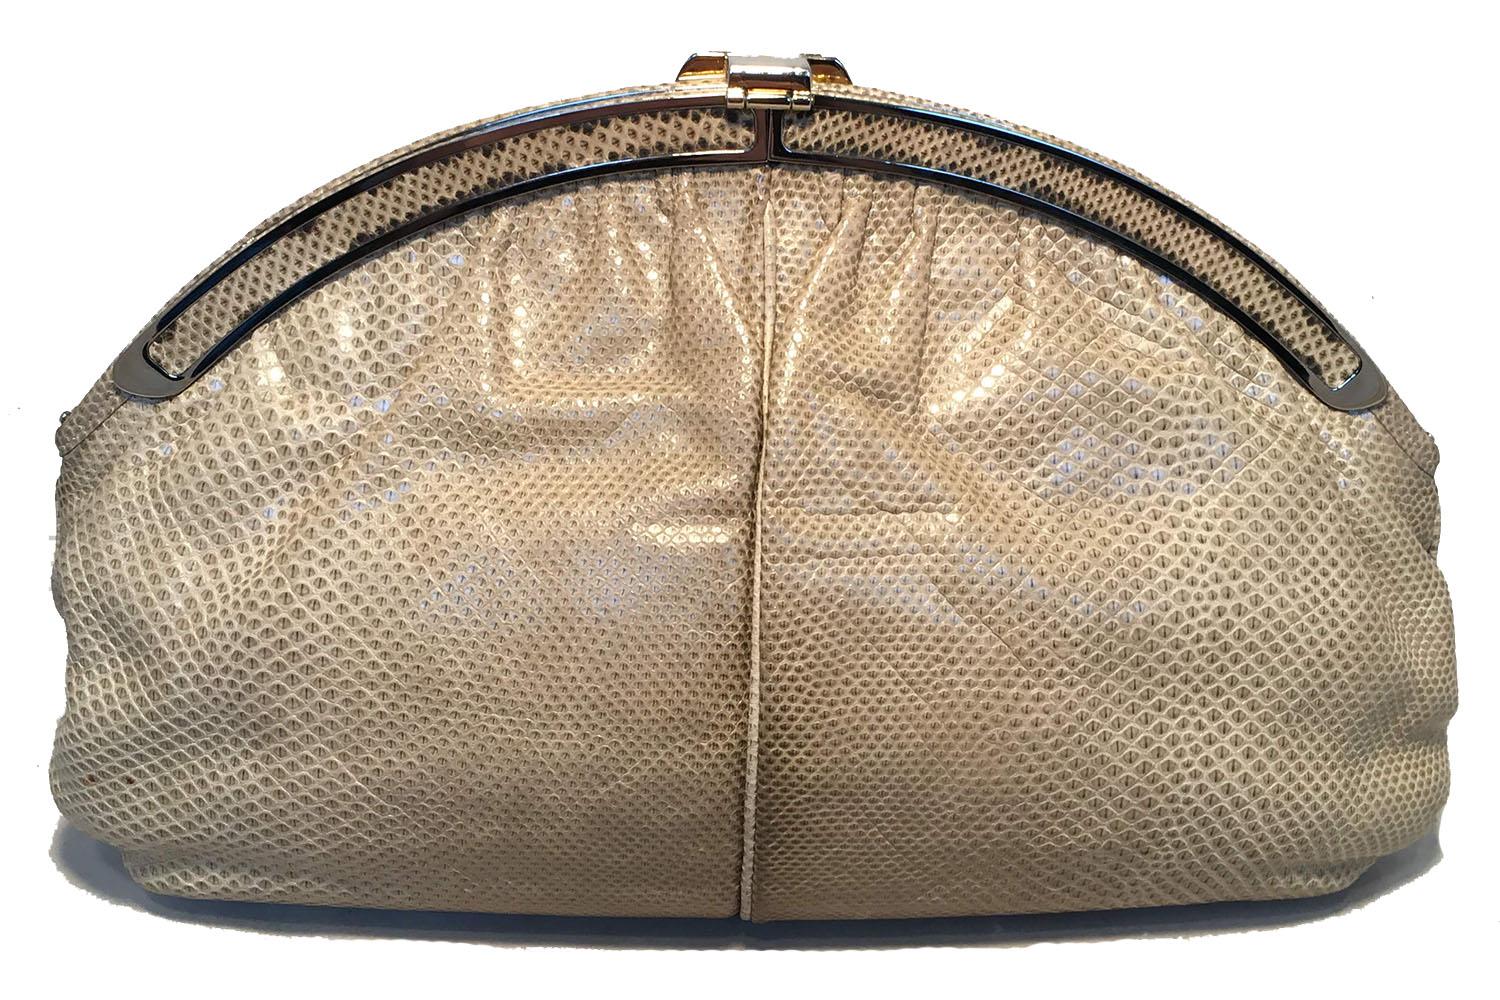 AMAZING Judith Leiber Vintage Beige Lizard Oversized Clutch in excellent condition. Natural beige lizard leather exterior trimmed with silver and gold hardware. Lift latch hinge closure opens to a light beige leather interior that holds one side